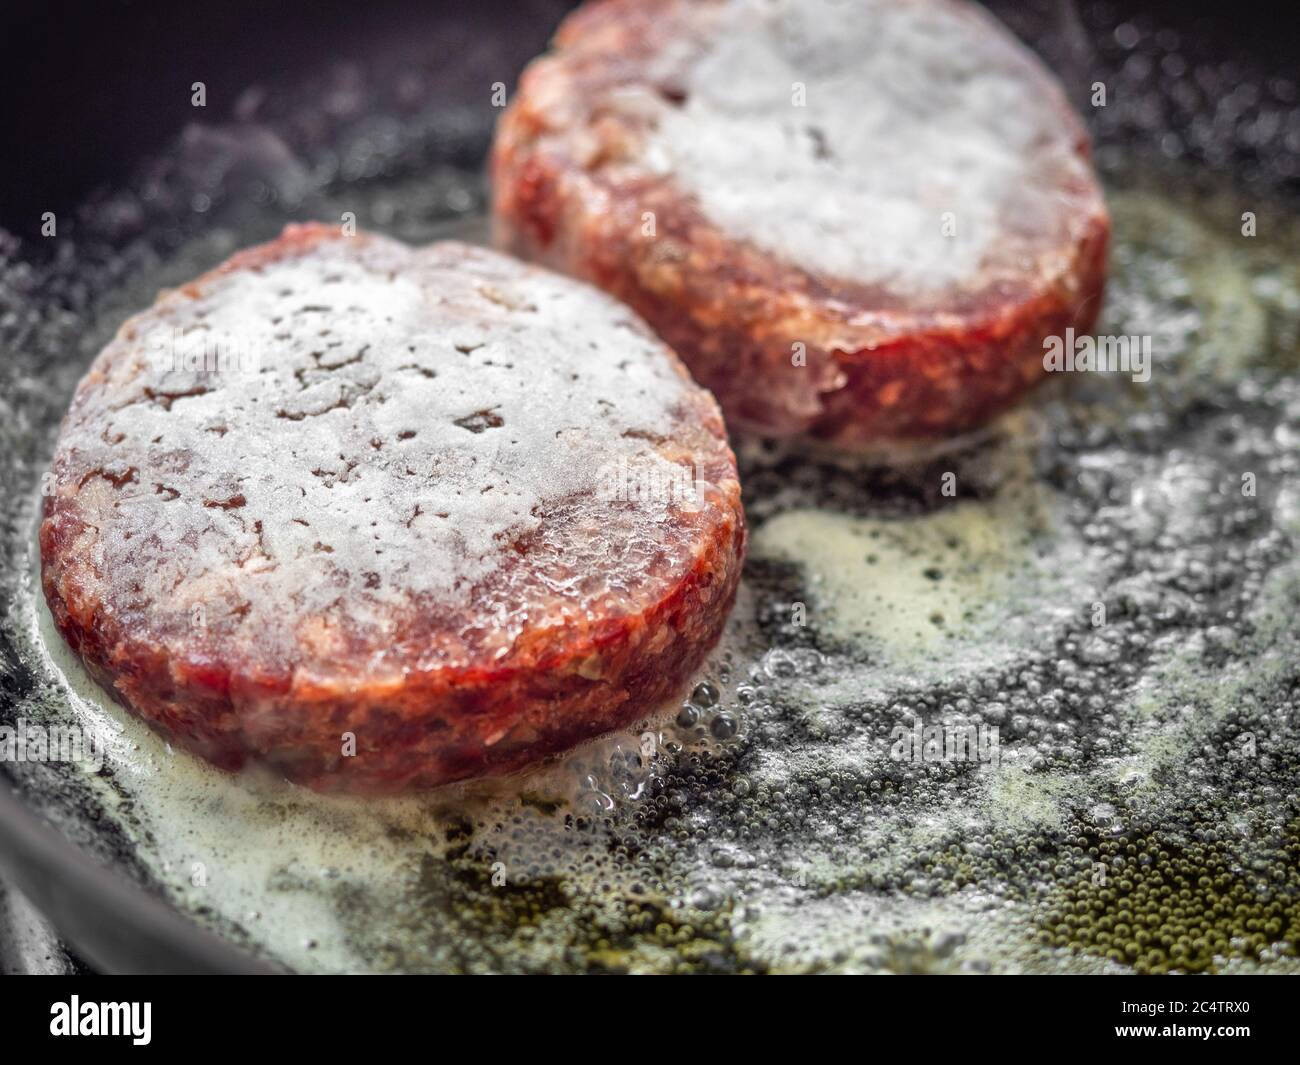 Frozen fresh beef burgers just fried in frying pan. Close-up homemade juicy minced meat patties burgers in iron frying pan. Stock Photo